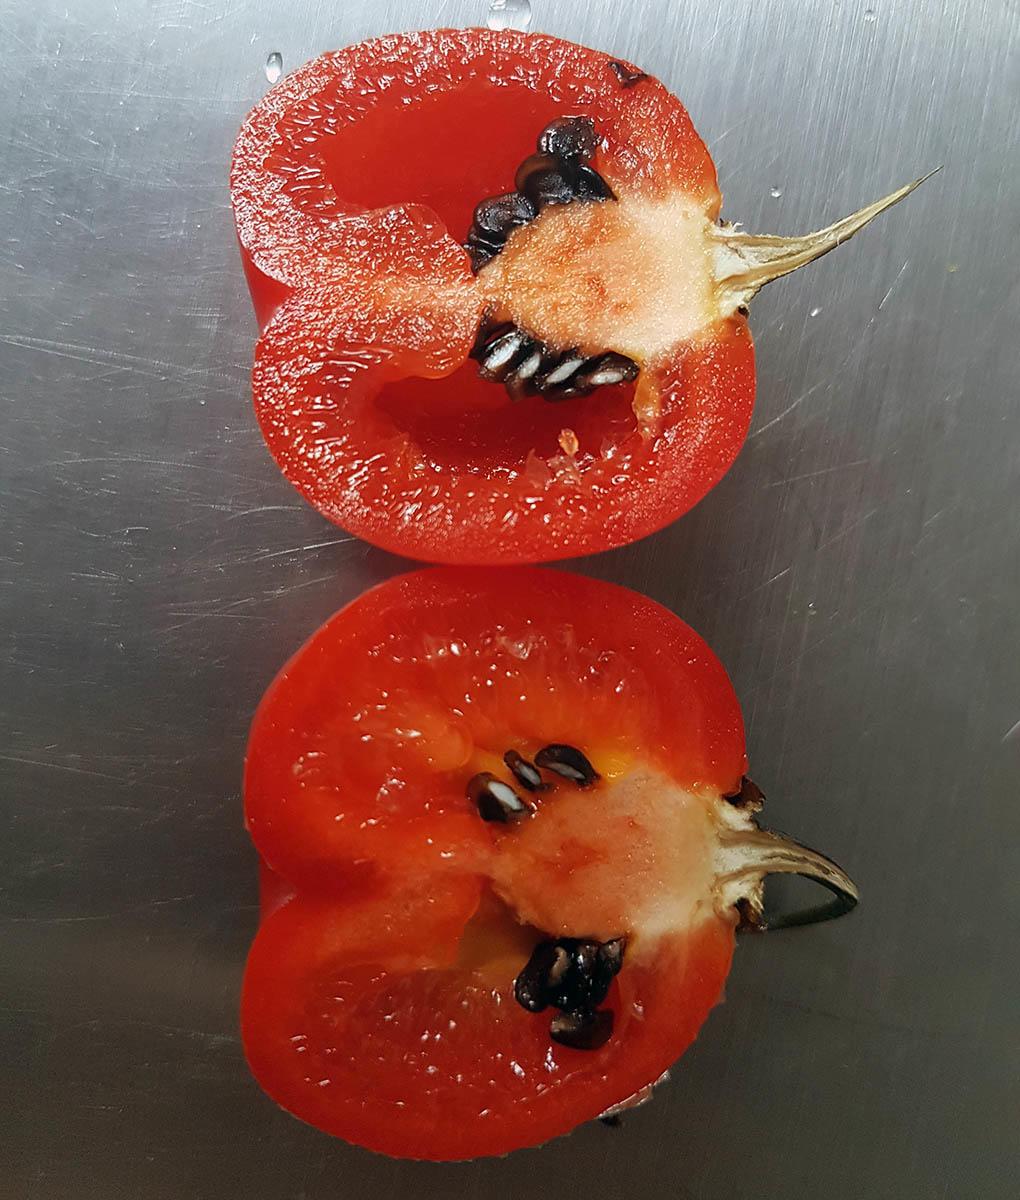 red pepper sliced in two to see seeds